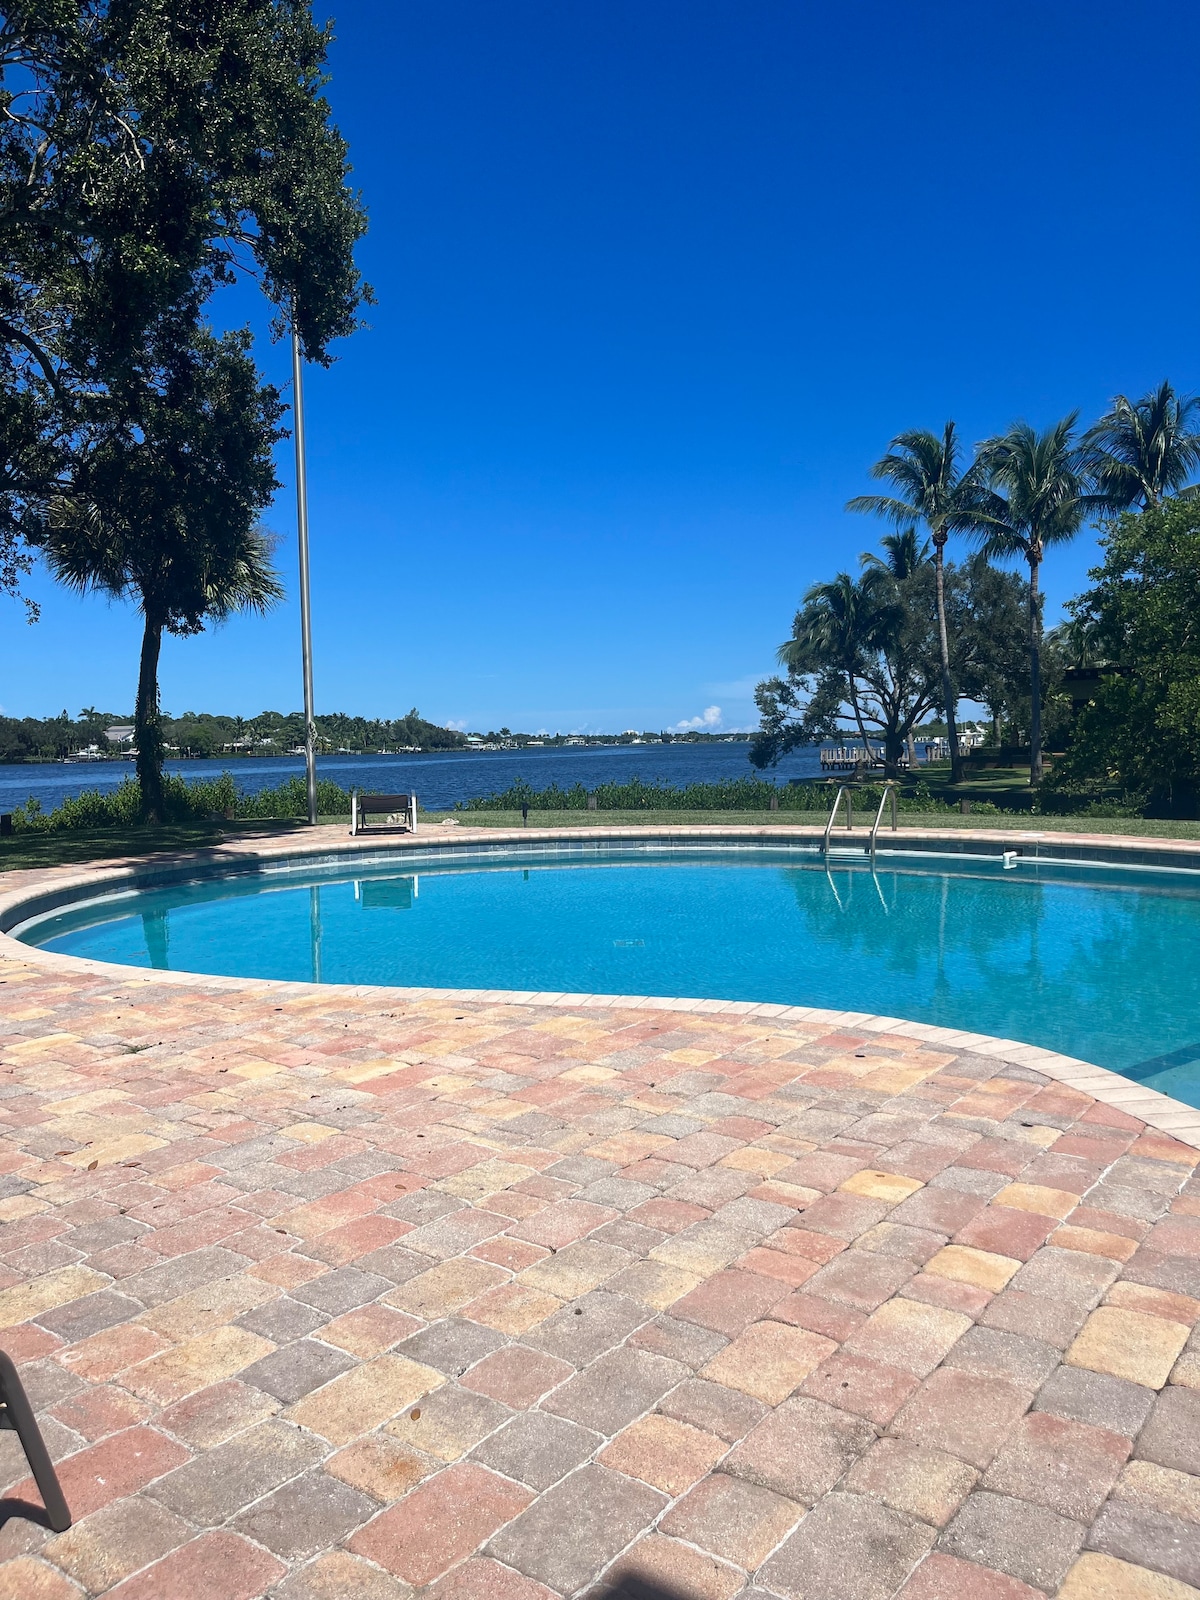 6 bed/5 bath waterfront home.